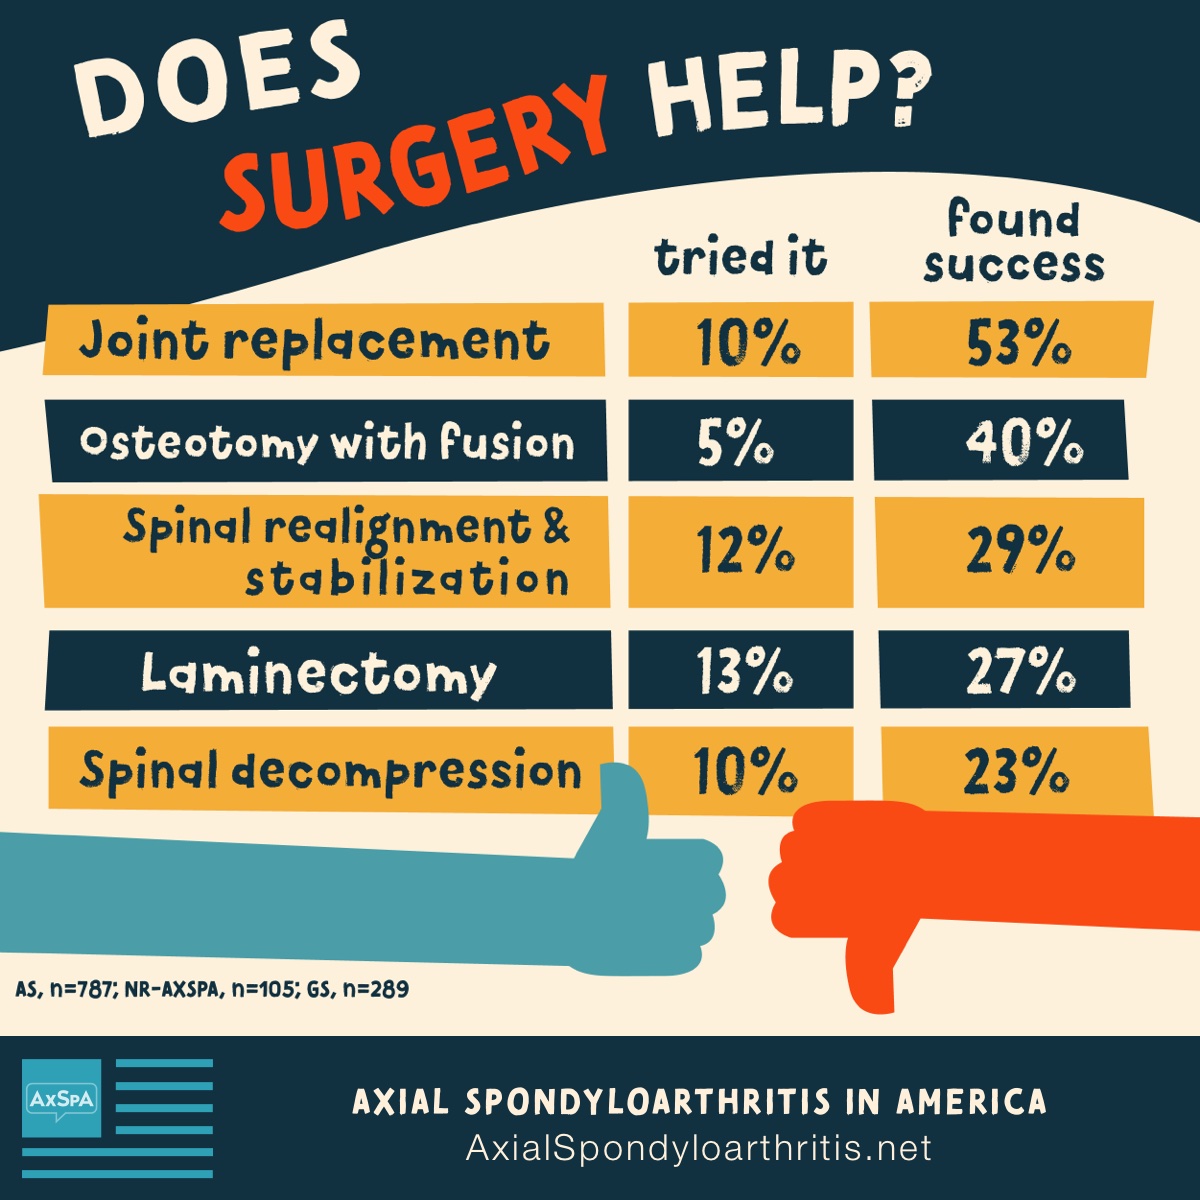 Chart showing that 53% of people found joint replacement surgery successful, 40% found osteotomy with fusion successful.